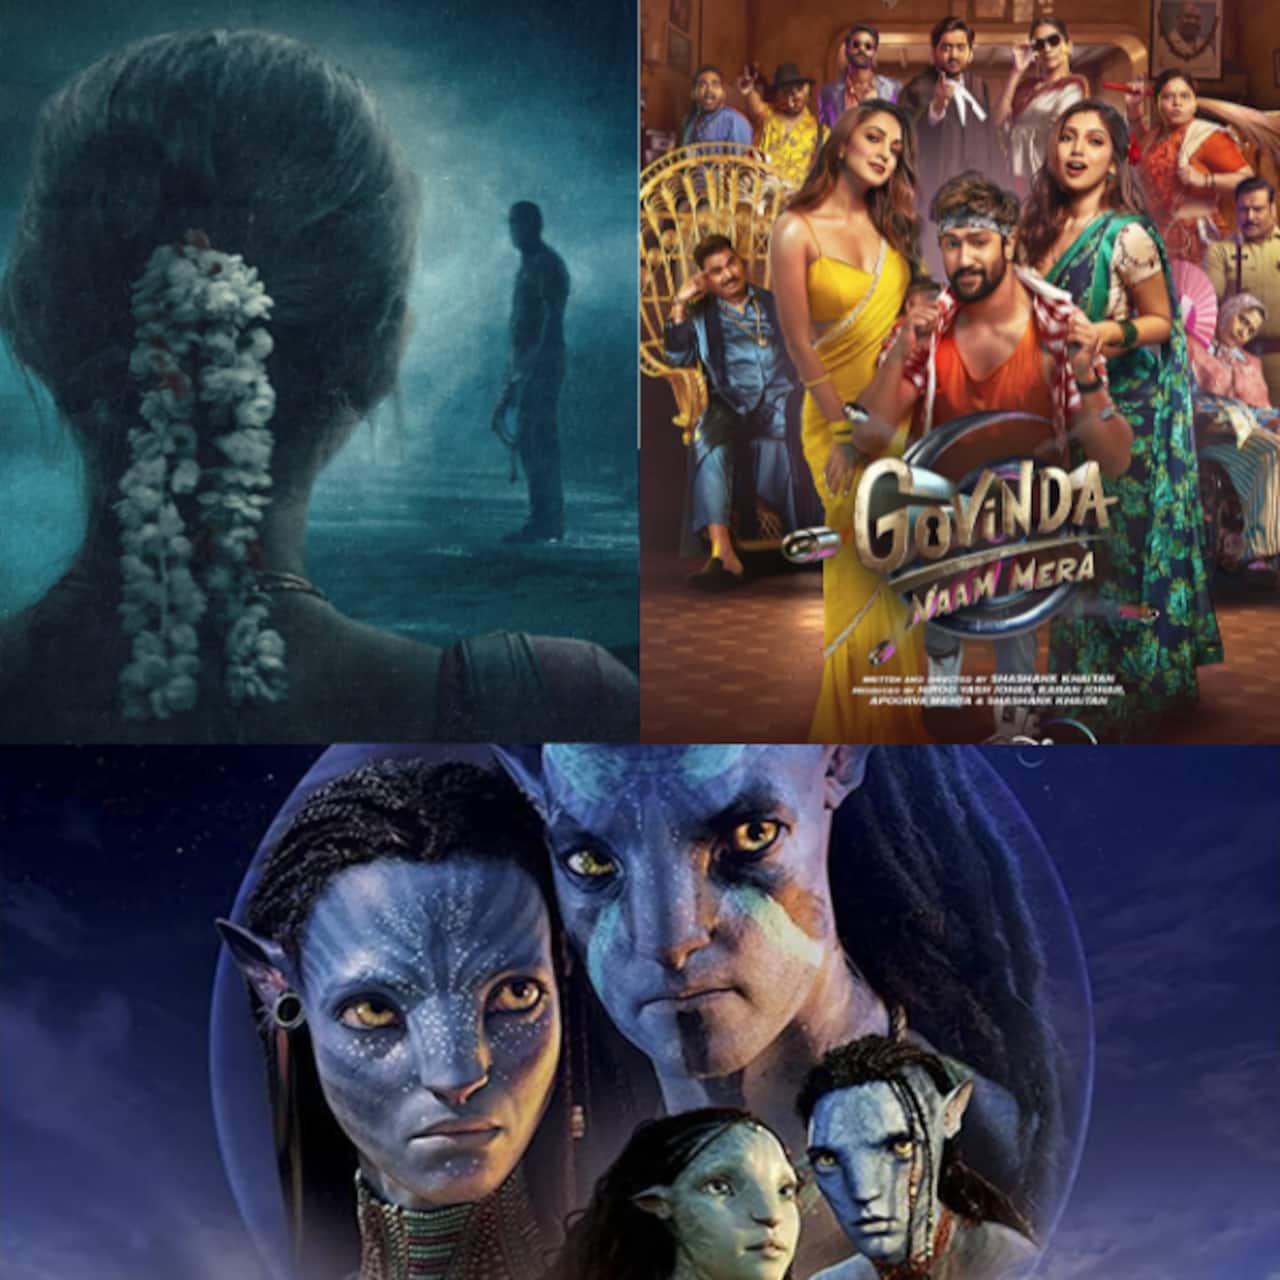 Upcoming new movies and web series in theatres and OTT this week: Avatar  The Way of Water, Govinda Naam Mera and more